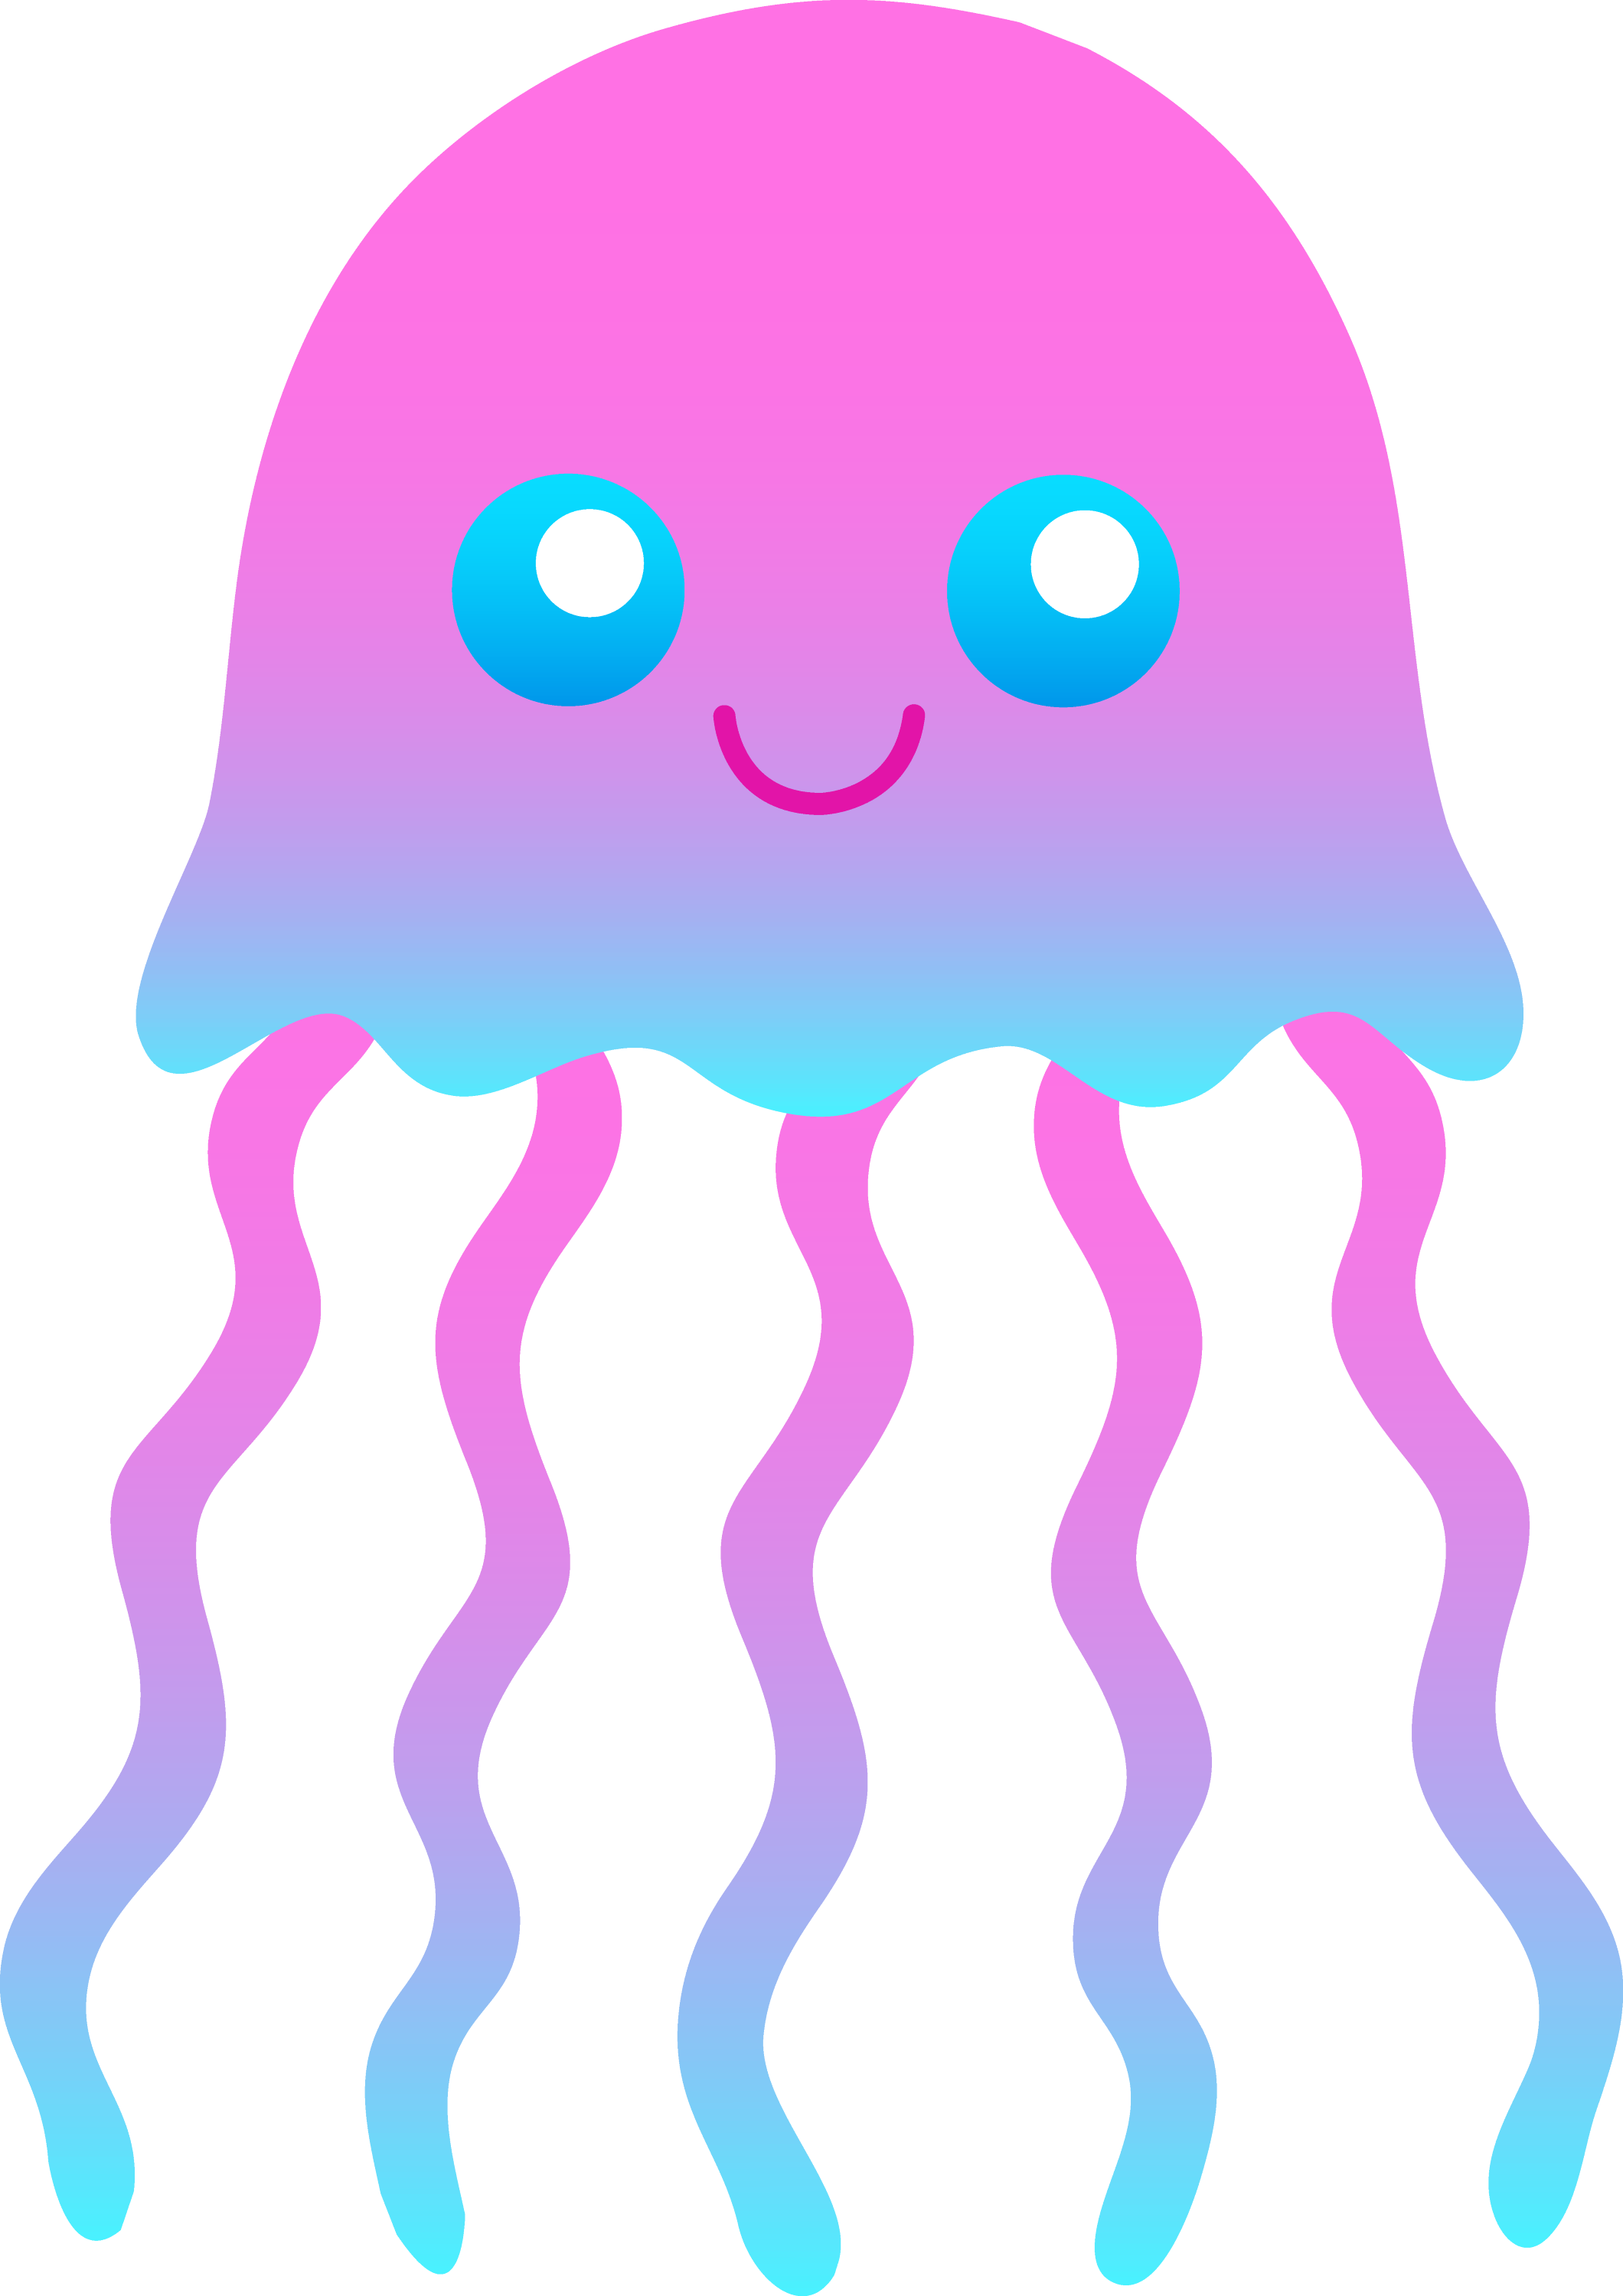 clipart of jelly - photo #24